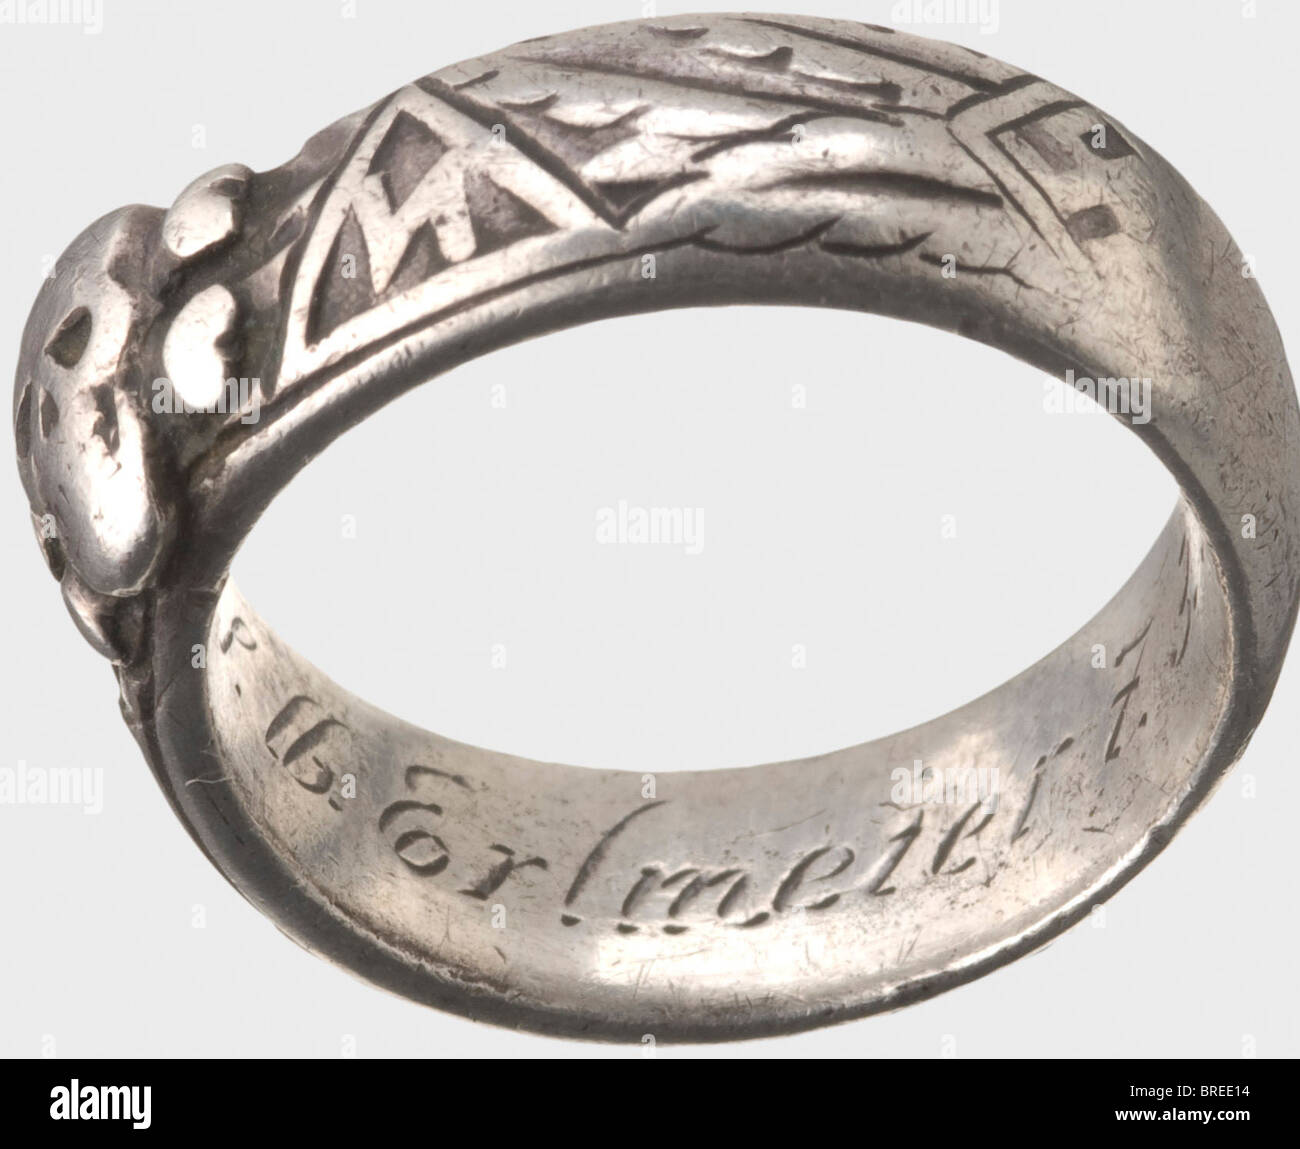 Joseph Erlmeier, a death's head ring of the Reichsführer SS Silver ring with solder-applied death's head, the inner band with the engraved dedication inscription 'S. lb. Erlmeier 7.3.36 H. Himmler'. The back third of the ring is quite worn. Weight 8.94 g. This ring comes from the estate of Sturmbannführer Joseph Erlmeier, SS number 475, Blood Order holder number 69, and wearer of the Golden Party Badge. historic, historical, 1930s, 20th century, Waffen-SS, armed division of the SS, armed service, armed services, NS, National Socialism, Nazism, Third Reich, Germ, Stock Photo